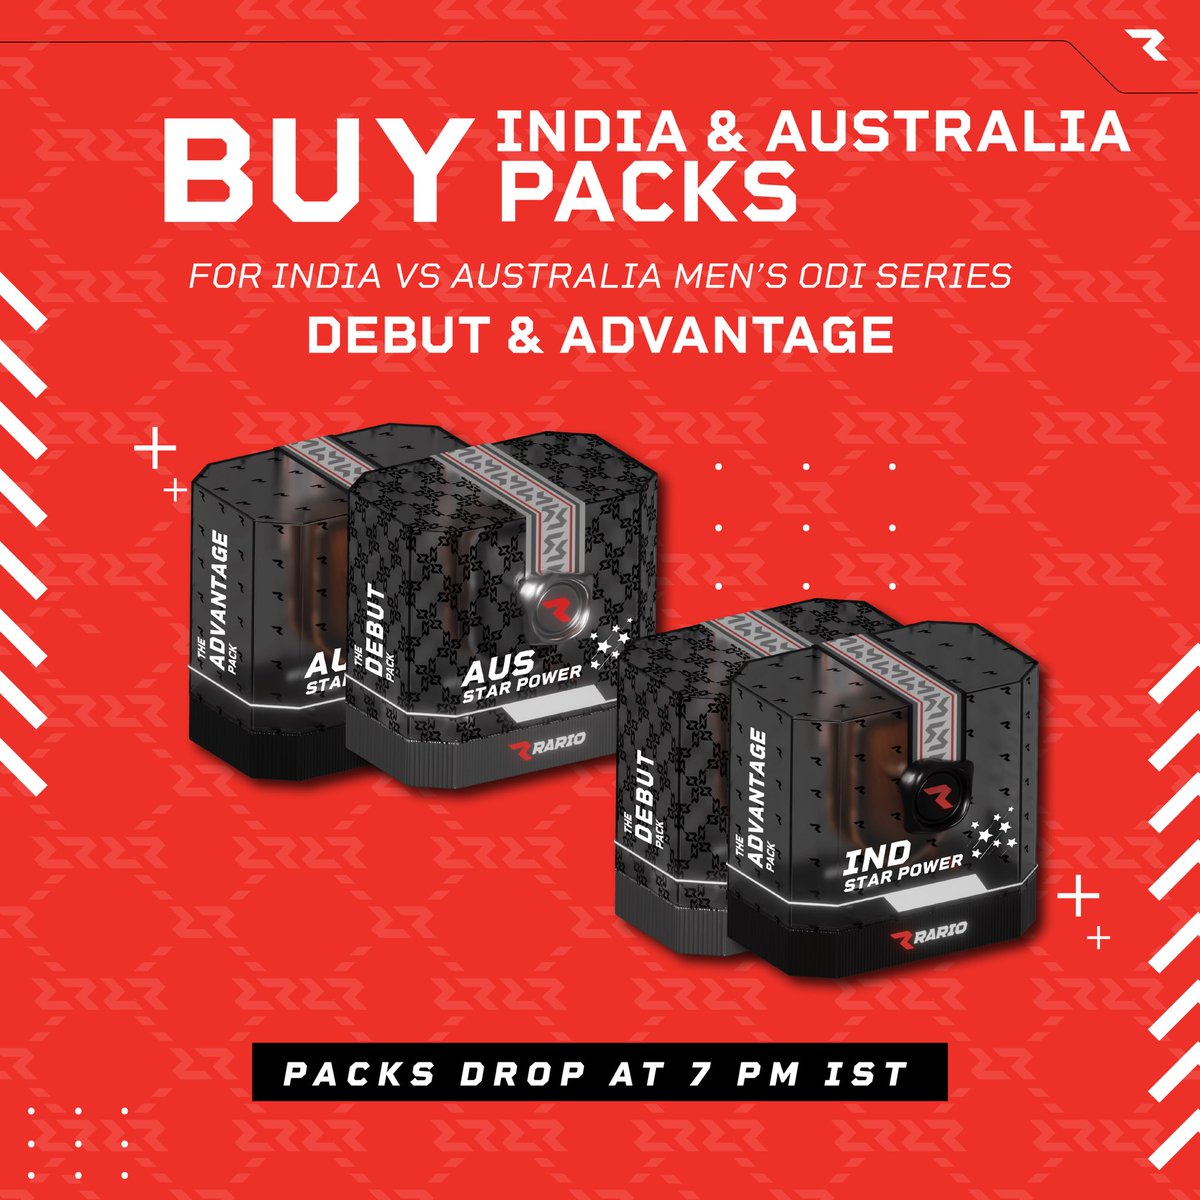 Another ODI series! It's India vs Australia 😍 Create teams with Player Cards of top IND - AUS stars & play D3 to win exciting rewa₹ds! Pro Hint - While the chase would be for the big stars, don't miss out on some dominating players from the lower orders of both teams.…